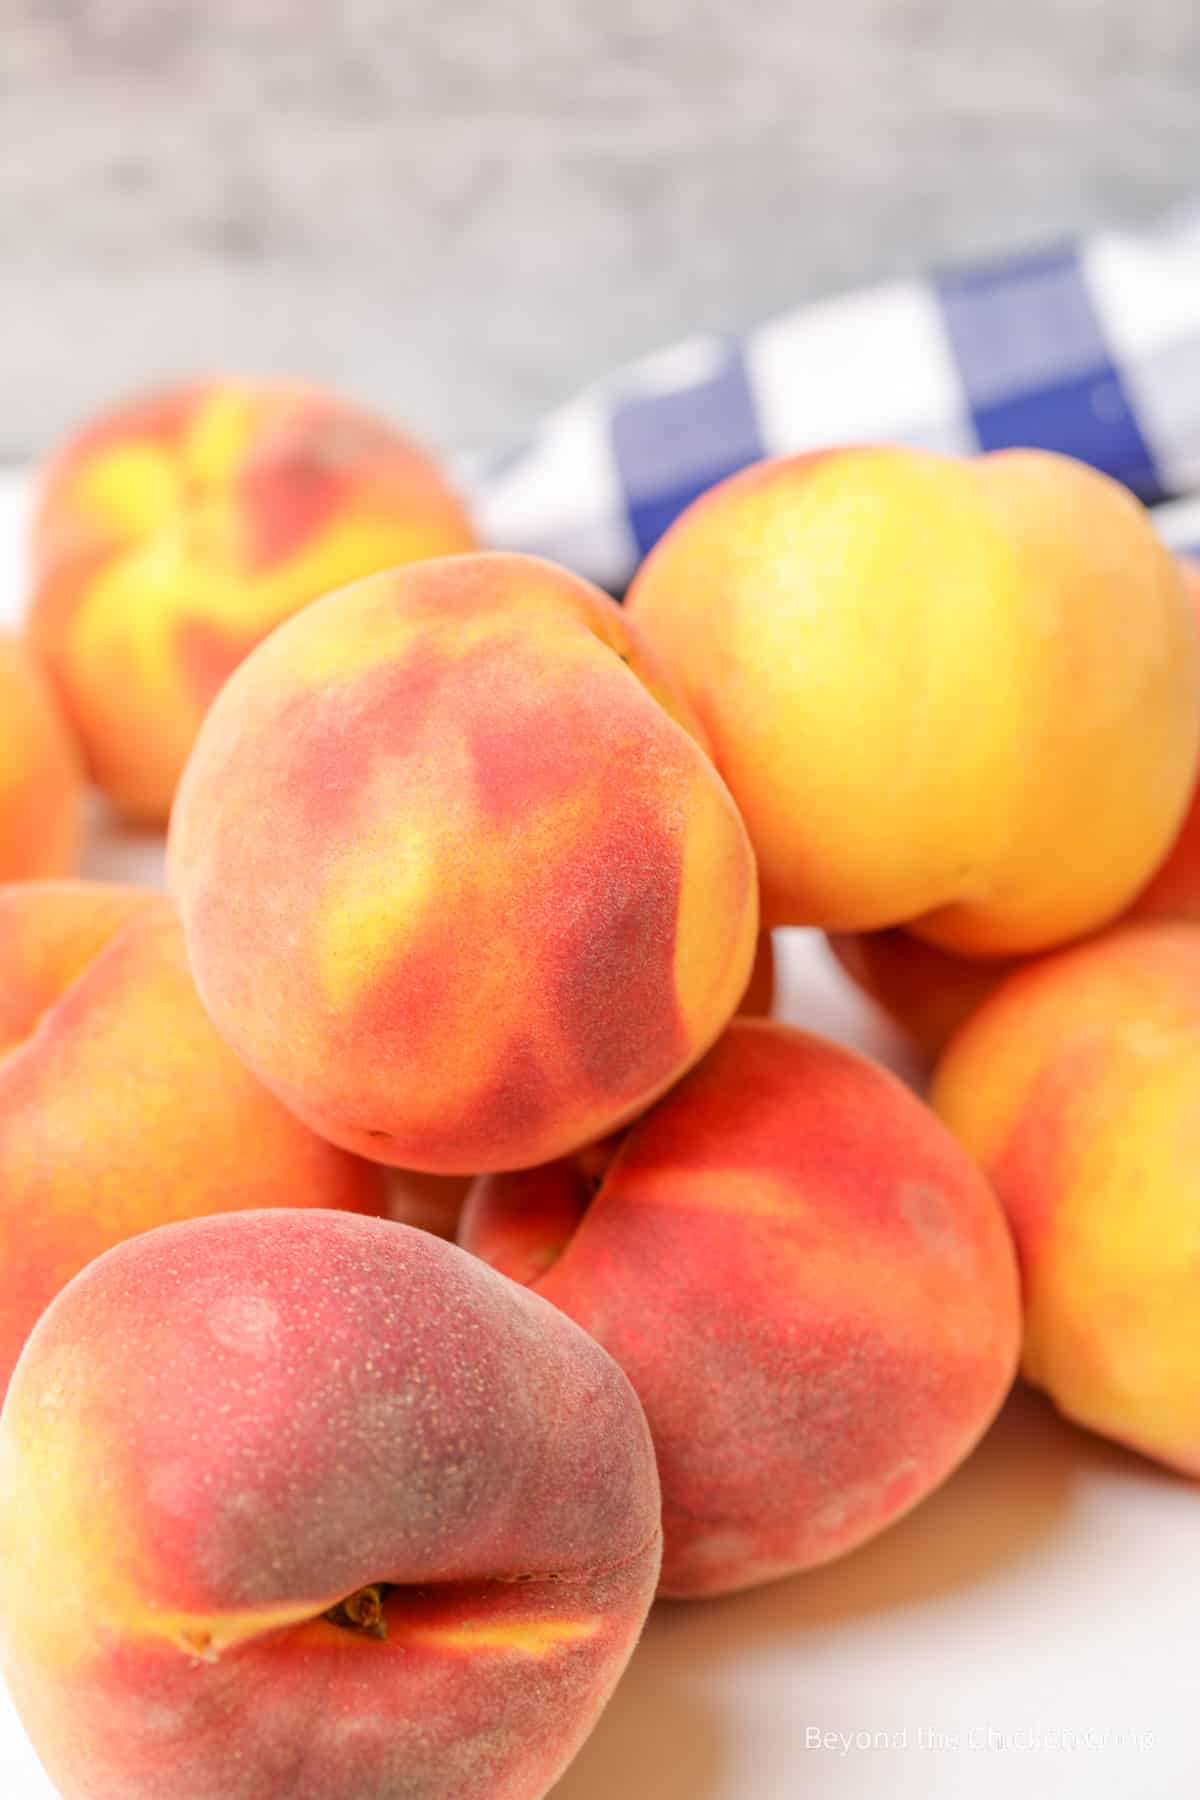 Fresh peaches piled together.